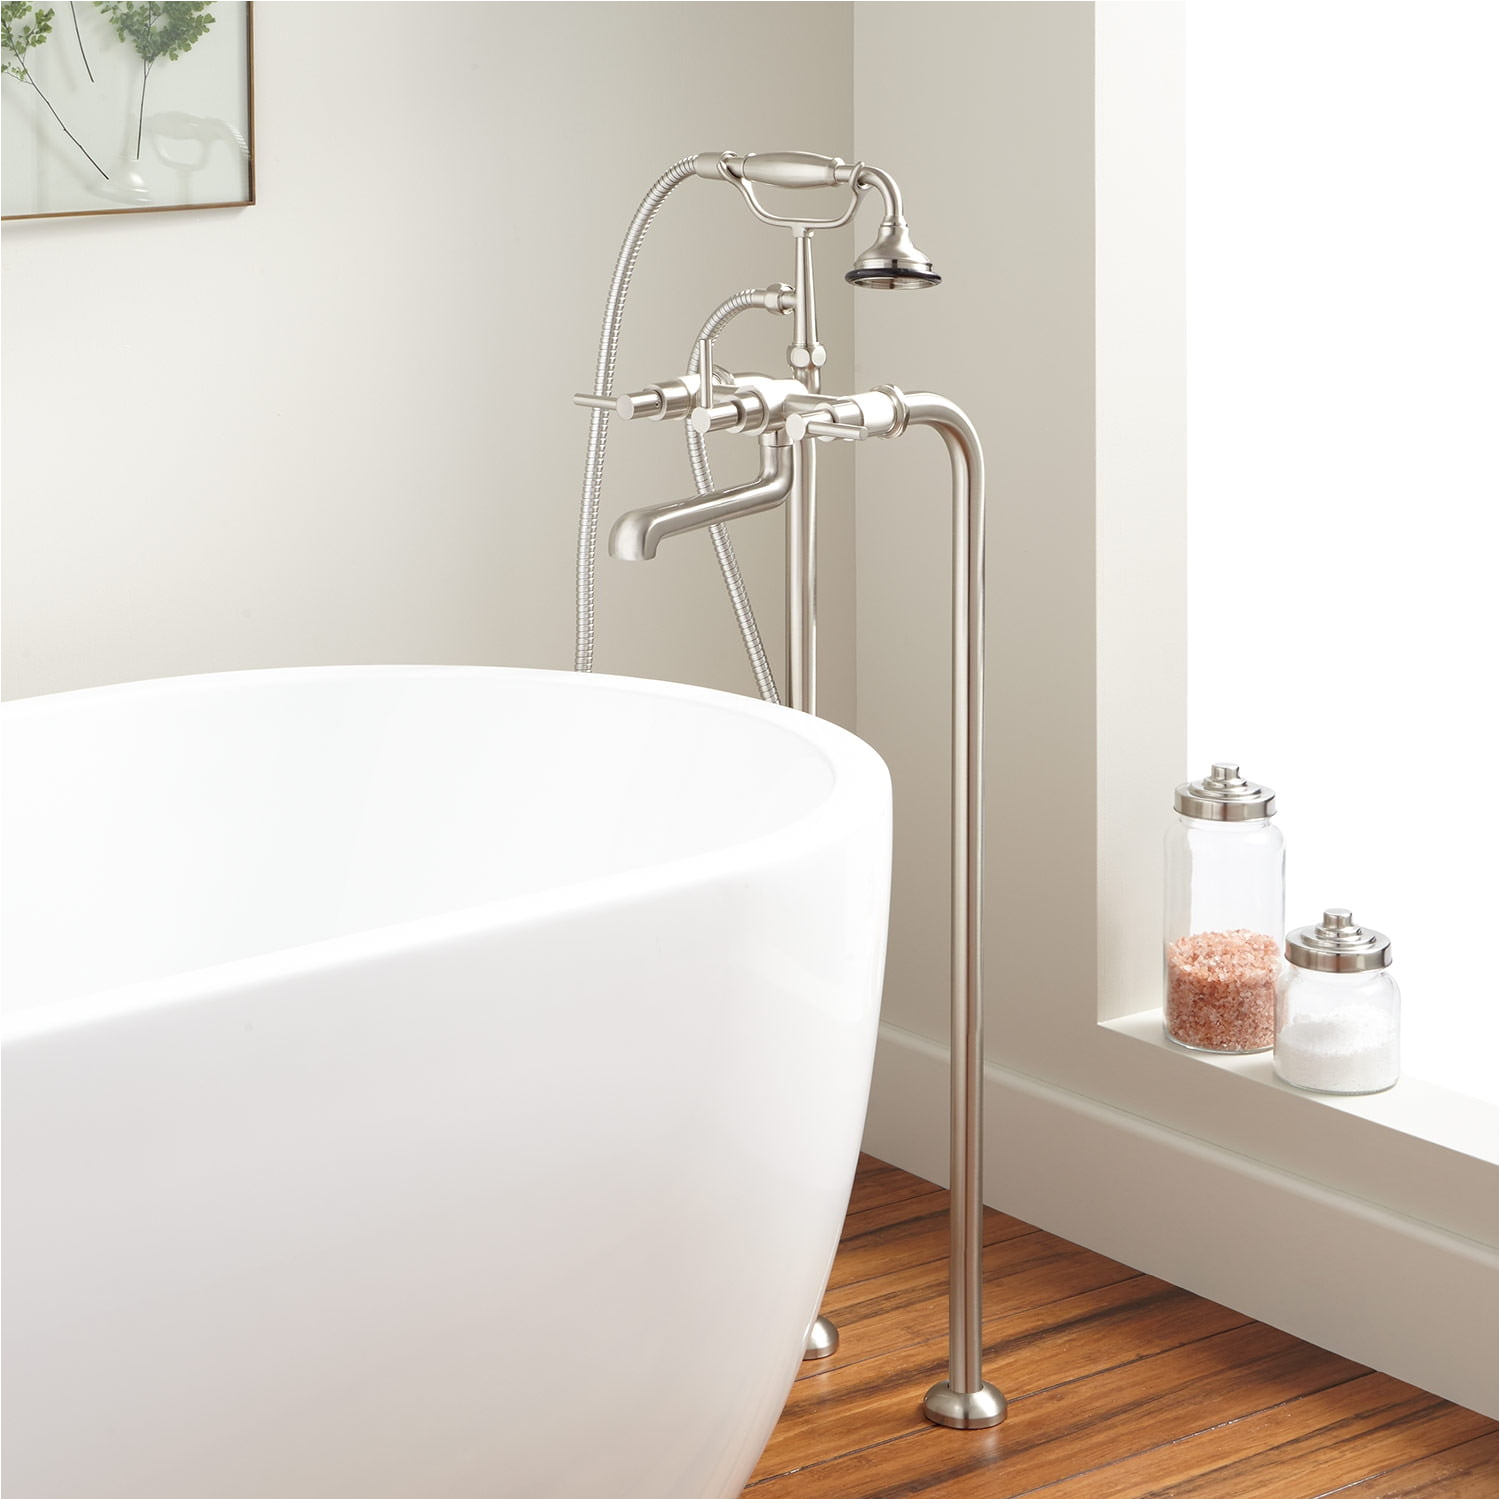 contemporary freestanding tub faucet supplies without shutoff valves lever handles